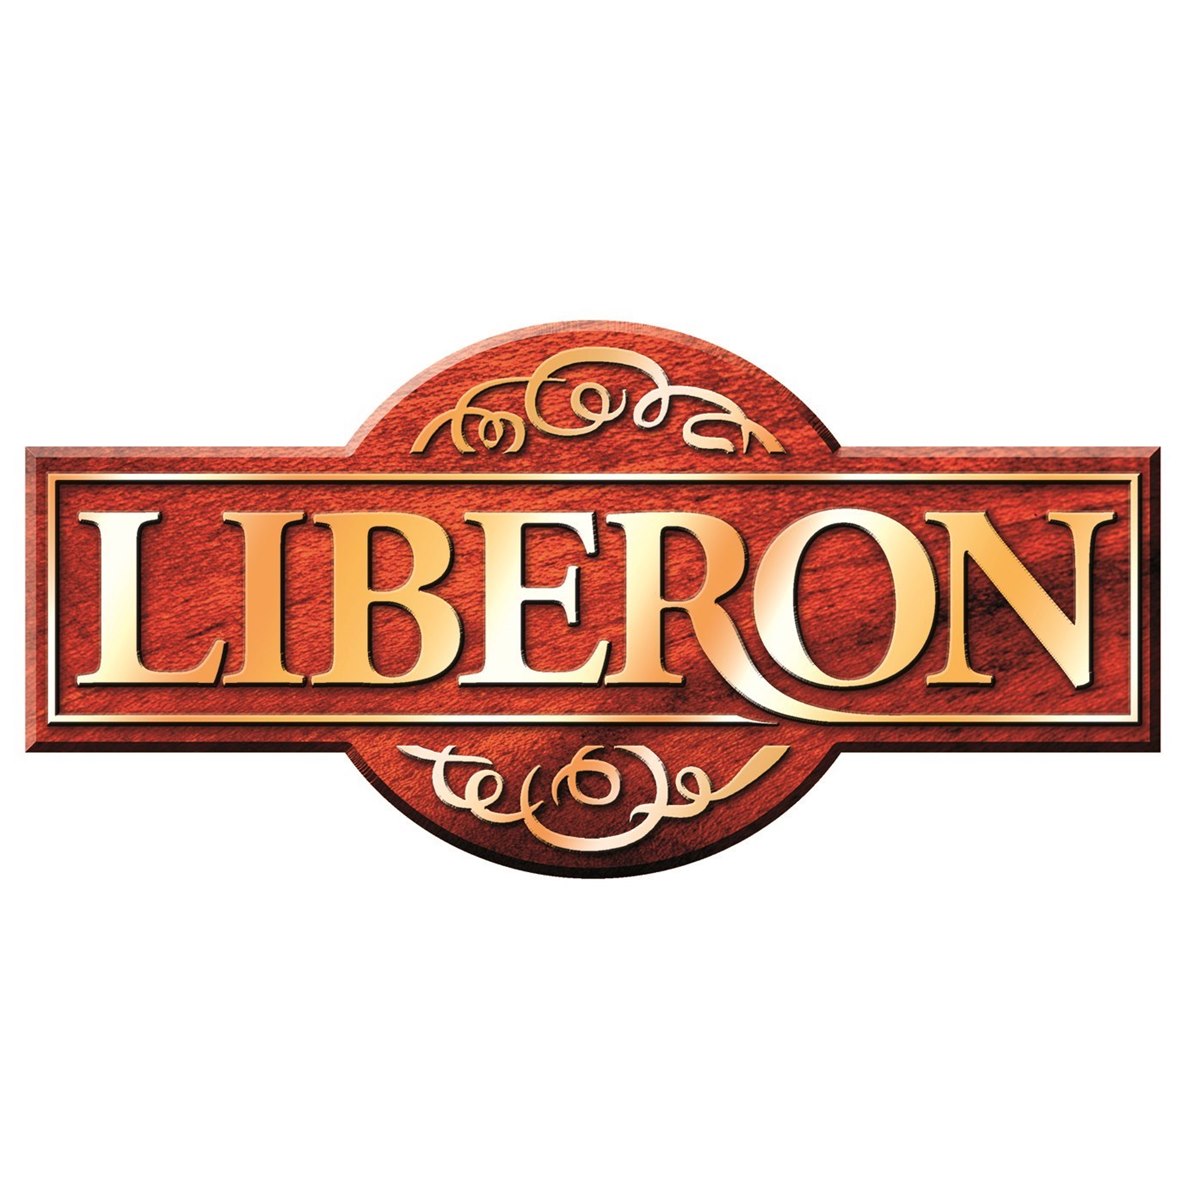 Where to buy Liberon Woodcare Products